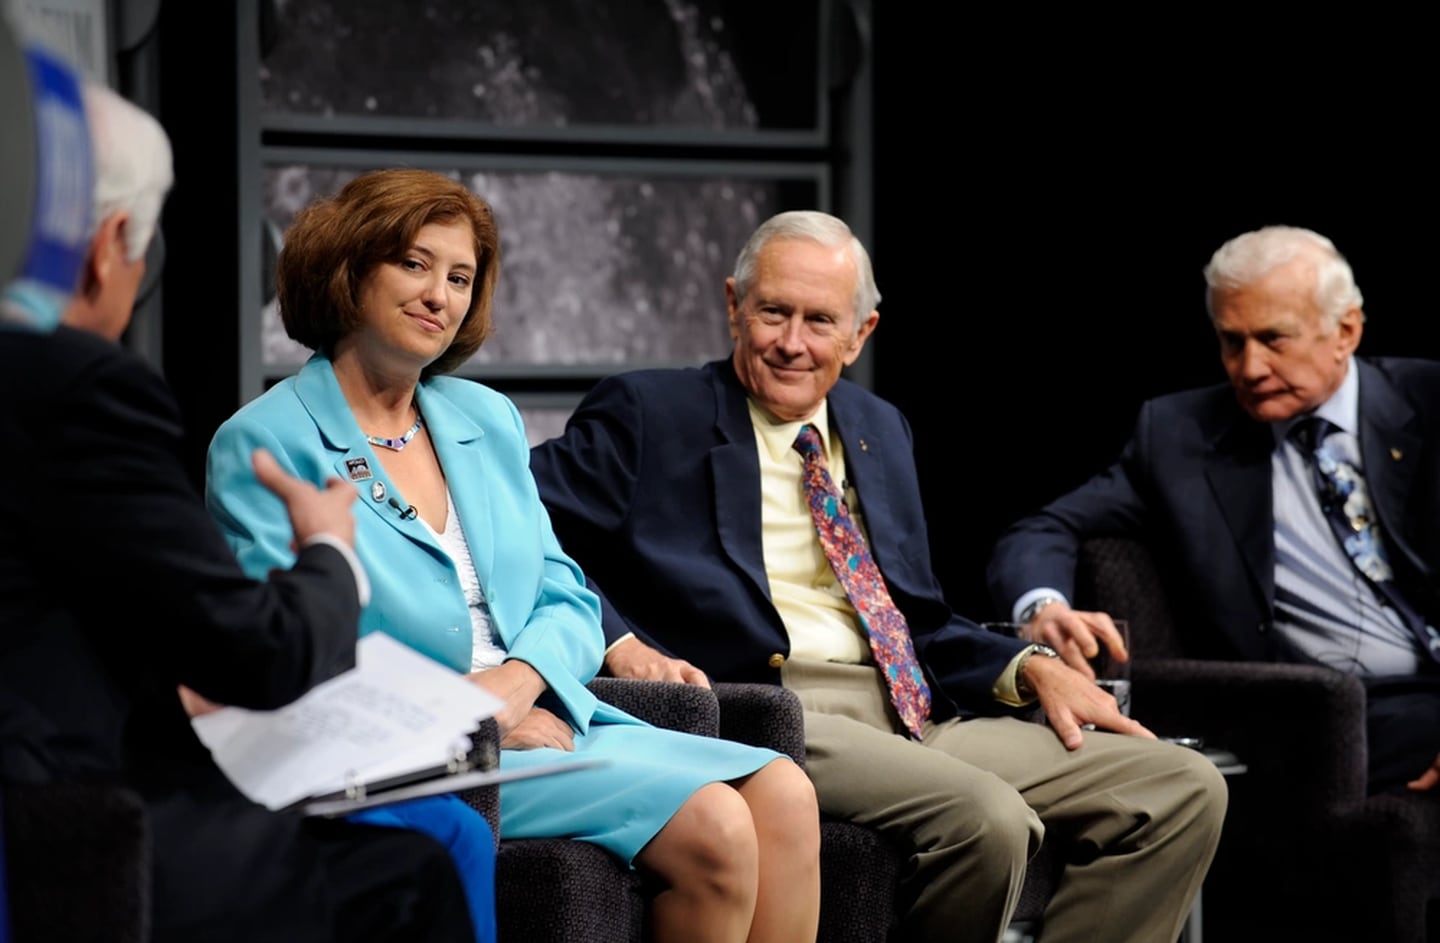 Veteran journalist Nick Clooney, seated left back to camera, moderated a panel discussion with Apollo 11 astronaut Buzz Aldrin, far right, Charlie Duke of Apollo 16, John Grunsfeld of the recent Hubble mission, not seen, and Goddard Space Flight Center deputy director Laurie Leshin, second from left, Monday, July 20, 2009, at the Newseum in Washington as part of the commemoration of the 40th Anniversary of the Apollo 11 moon landing. (Bill Ingalls/NASA)